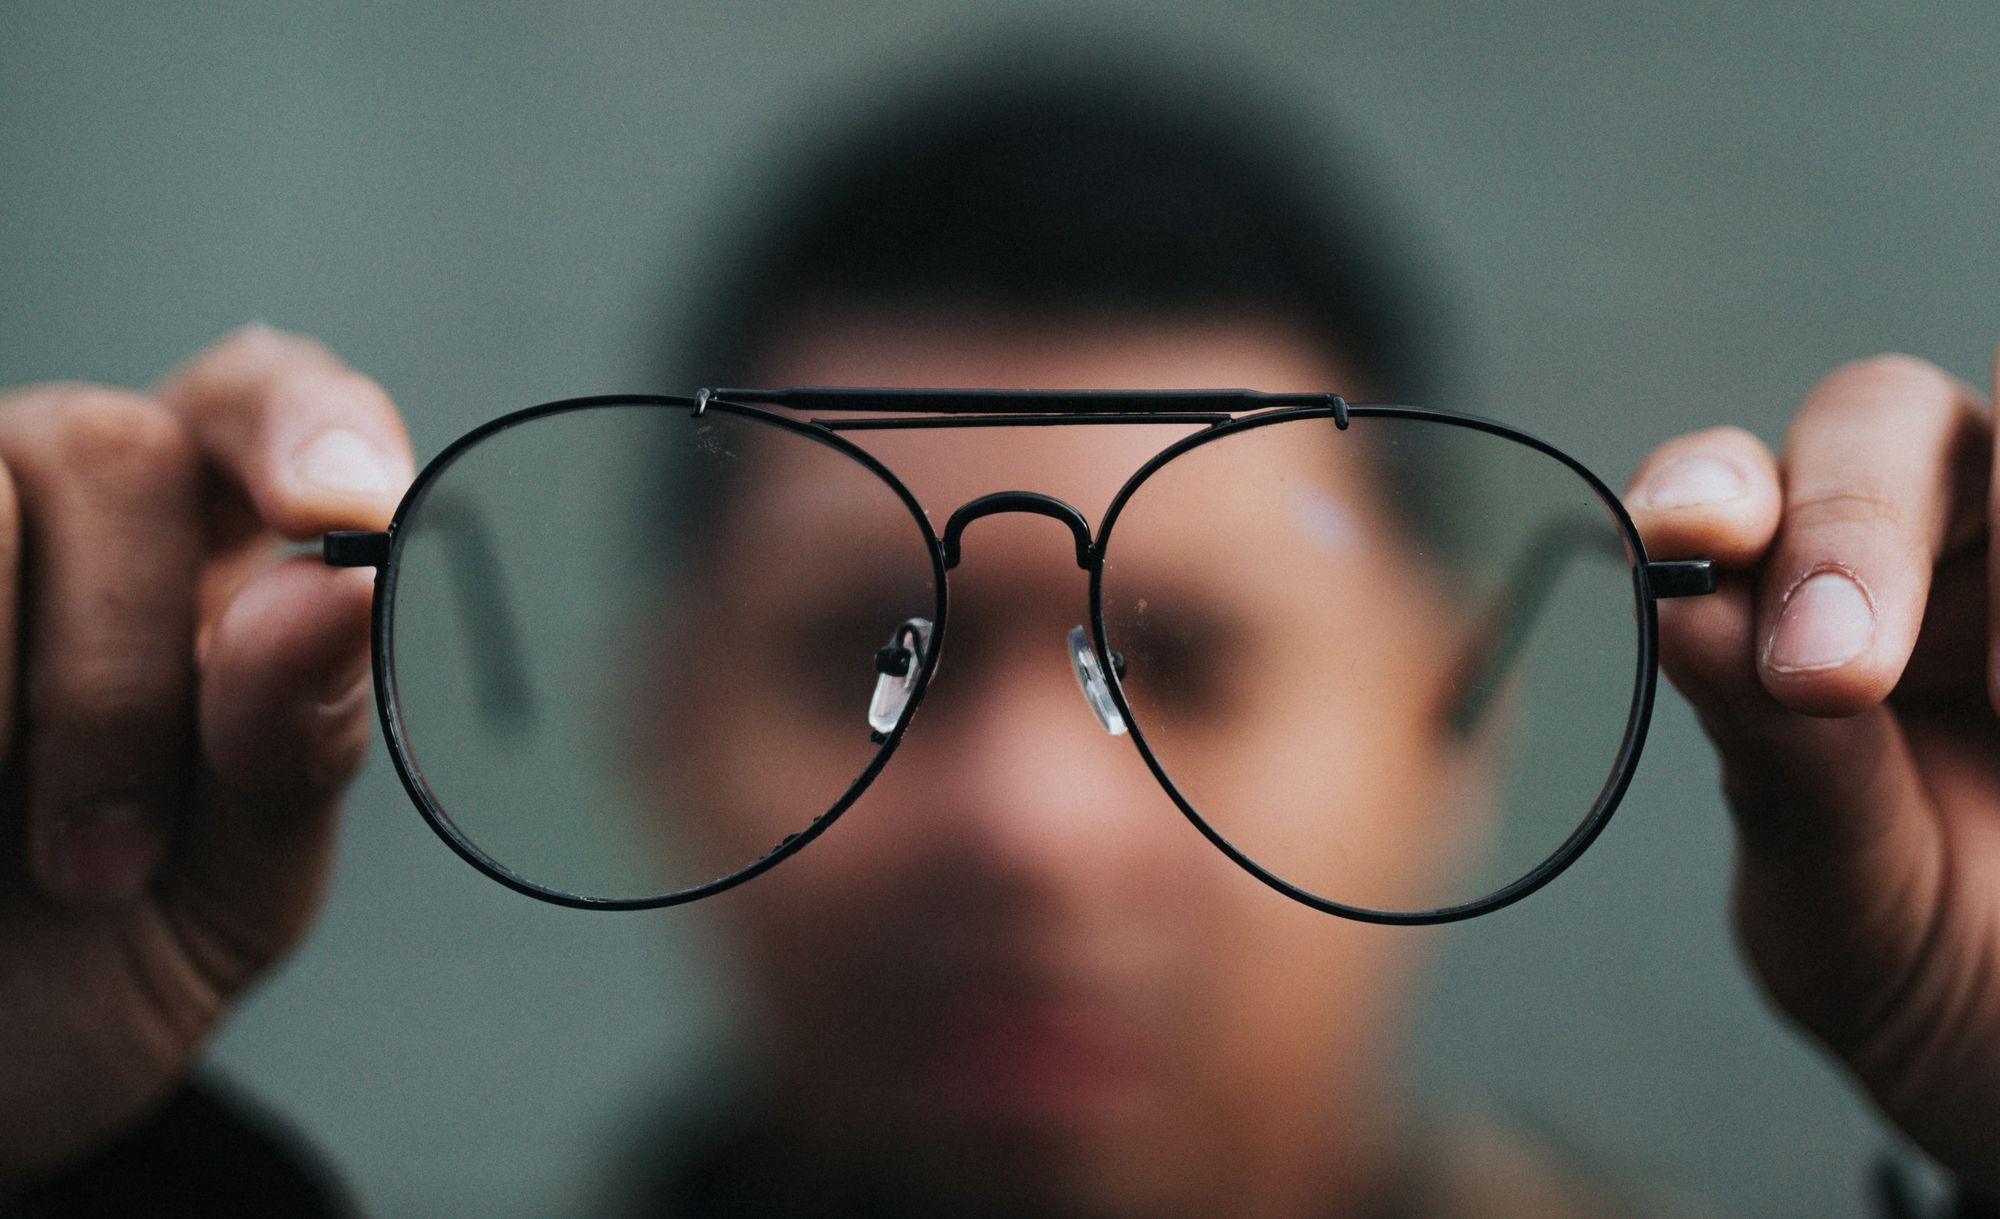 A pair of thin black-framed glasses is in focus, while the man holding them is blurred in the background